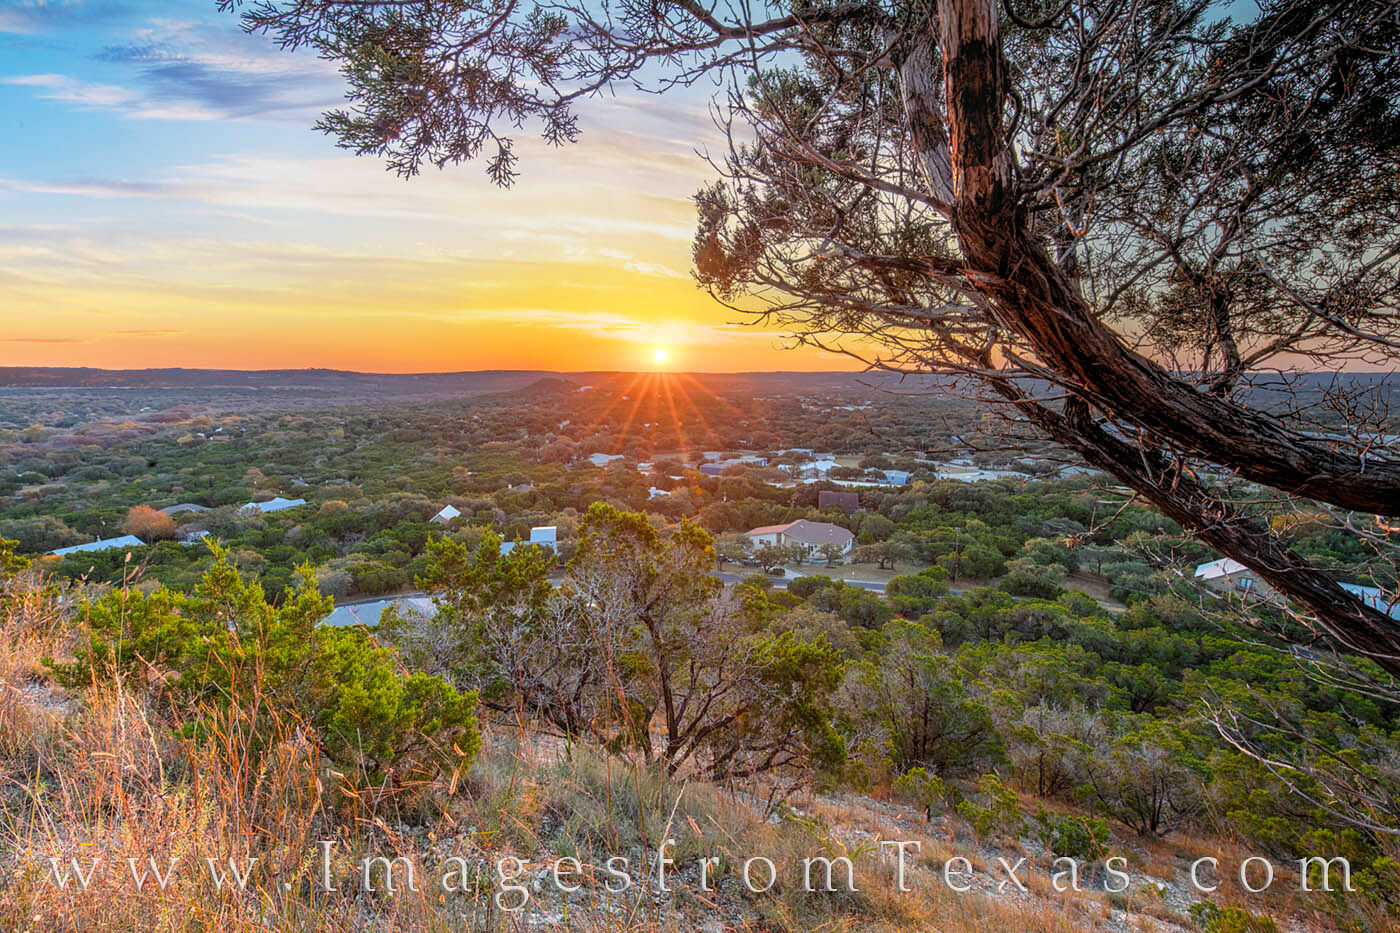 Atop Old Baldy in Wimberley Texas, the views stretch for miles and miles. Here, an Autumn sunrise is seen through the branches...